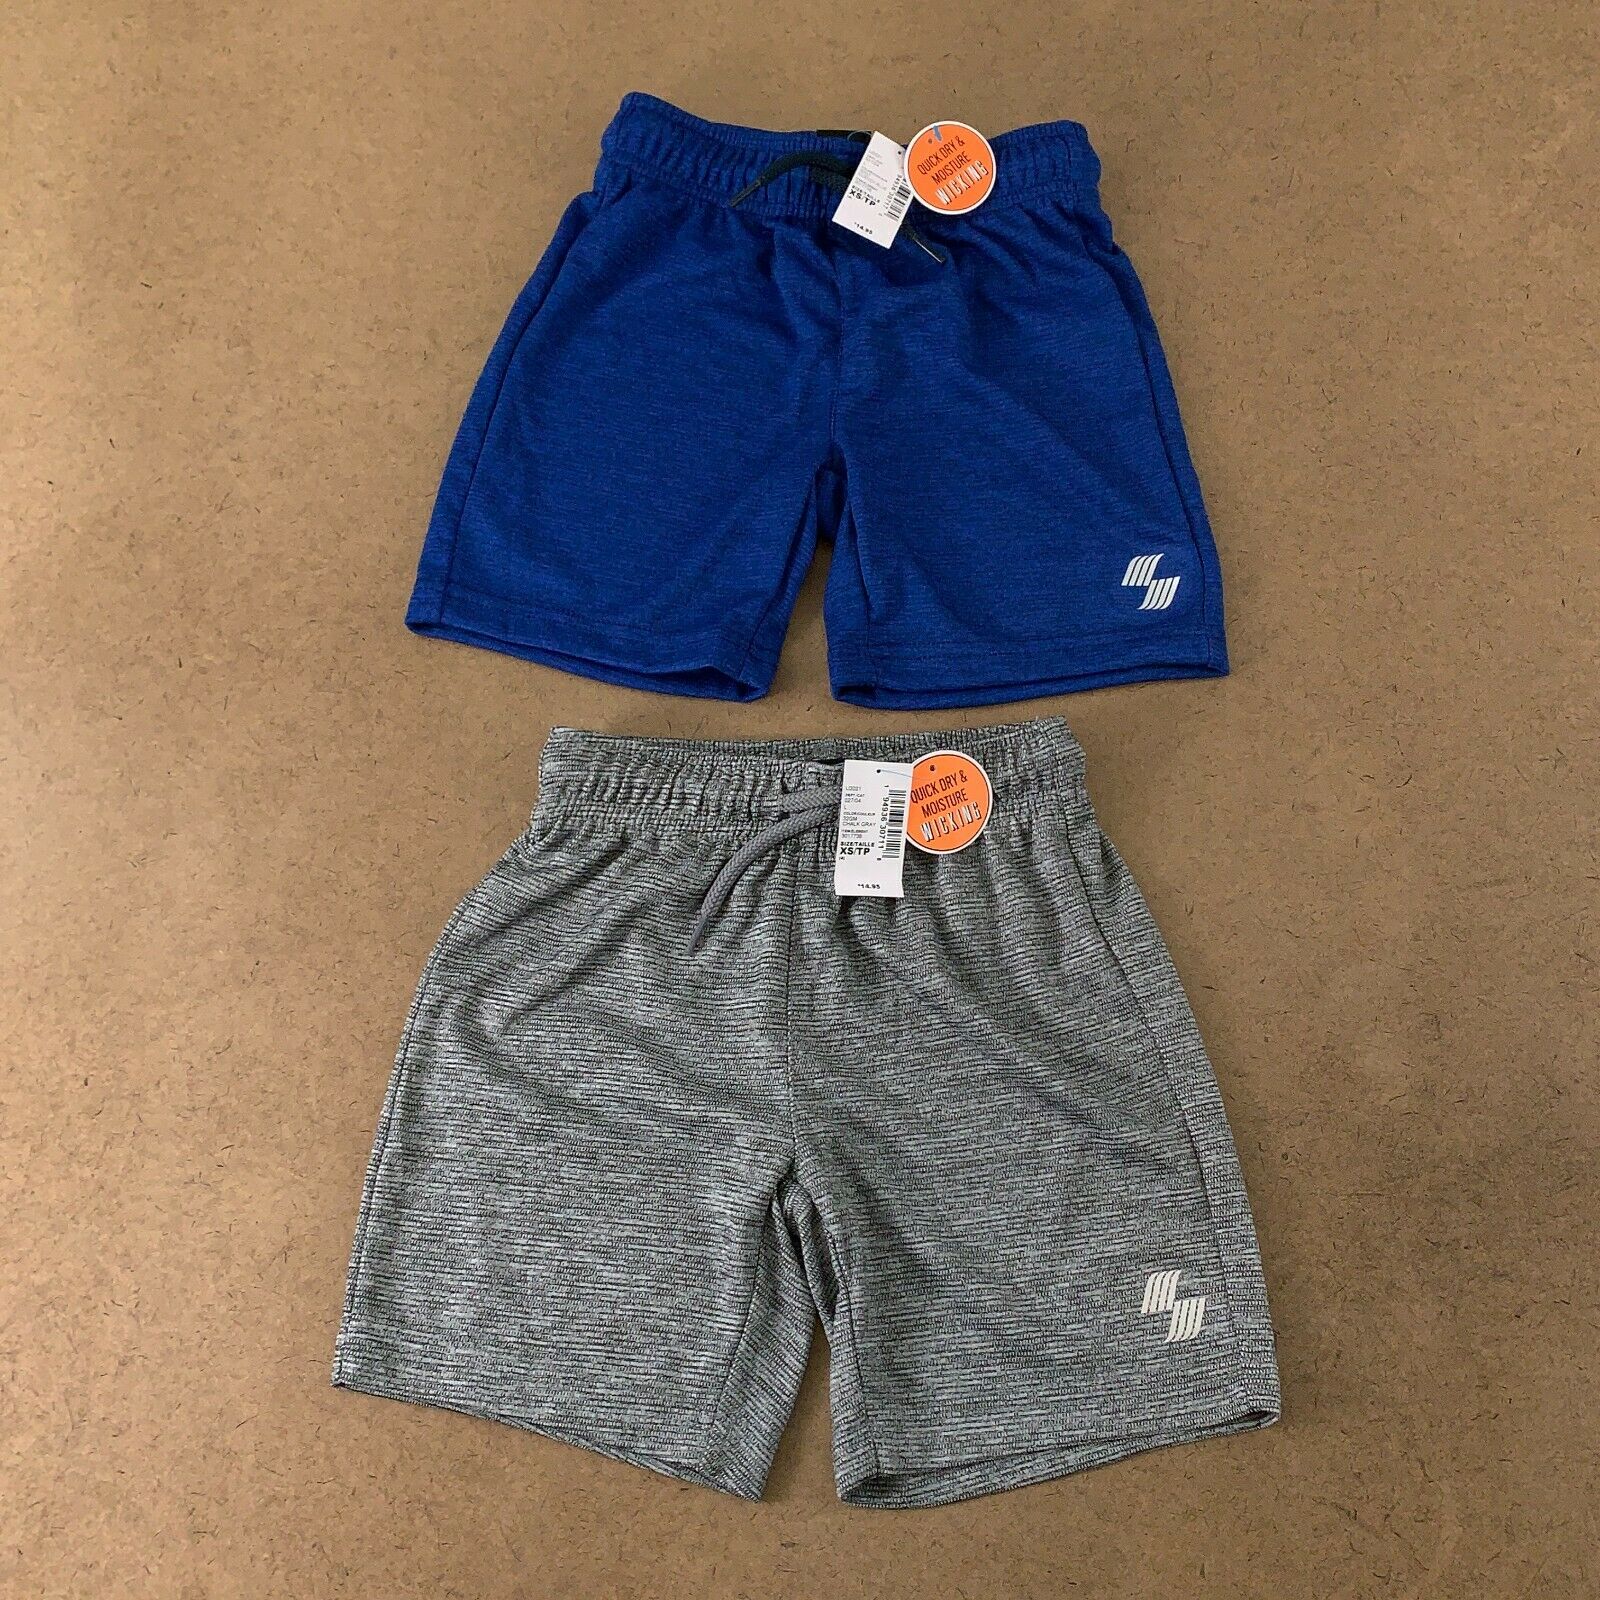 Lot Of 2 The Children's Place Boys Size Xs 4 Performance Basketball Shorts Nwt